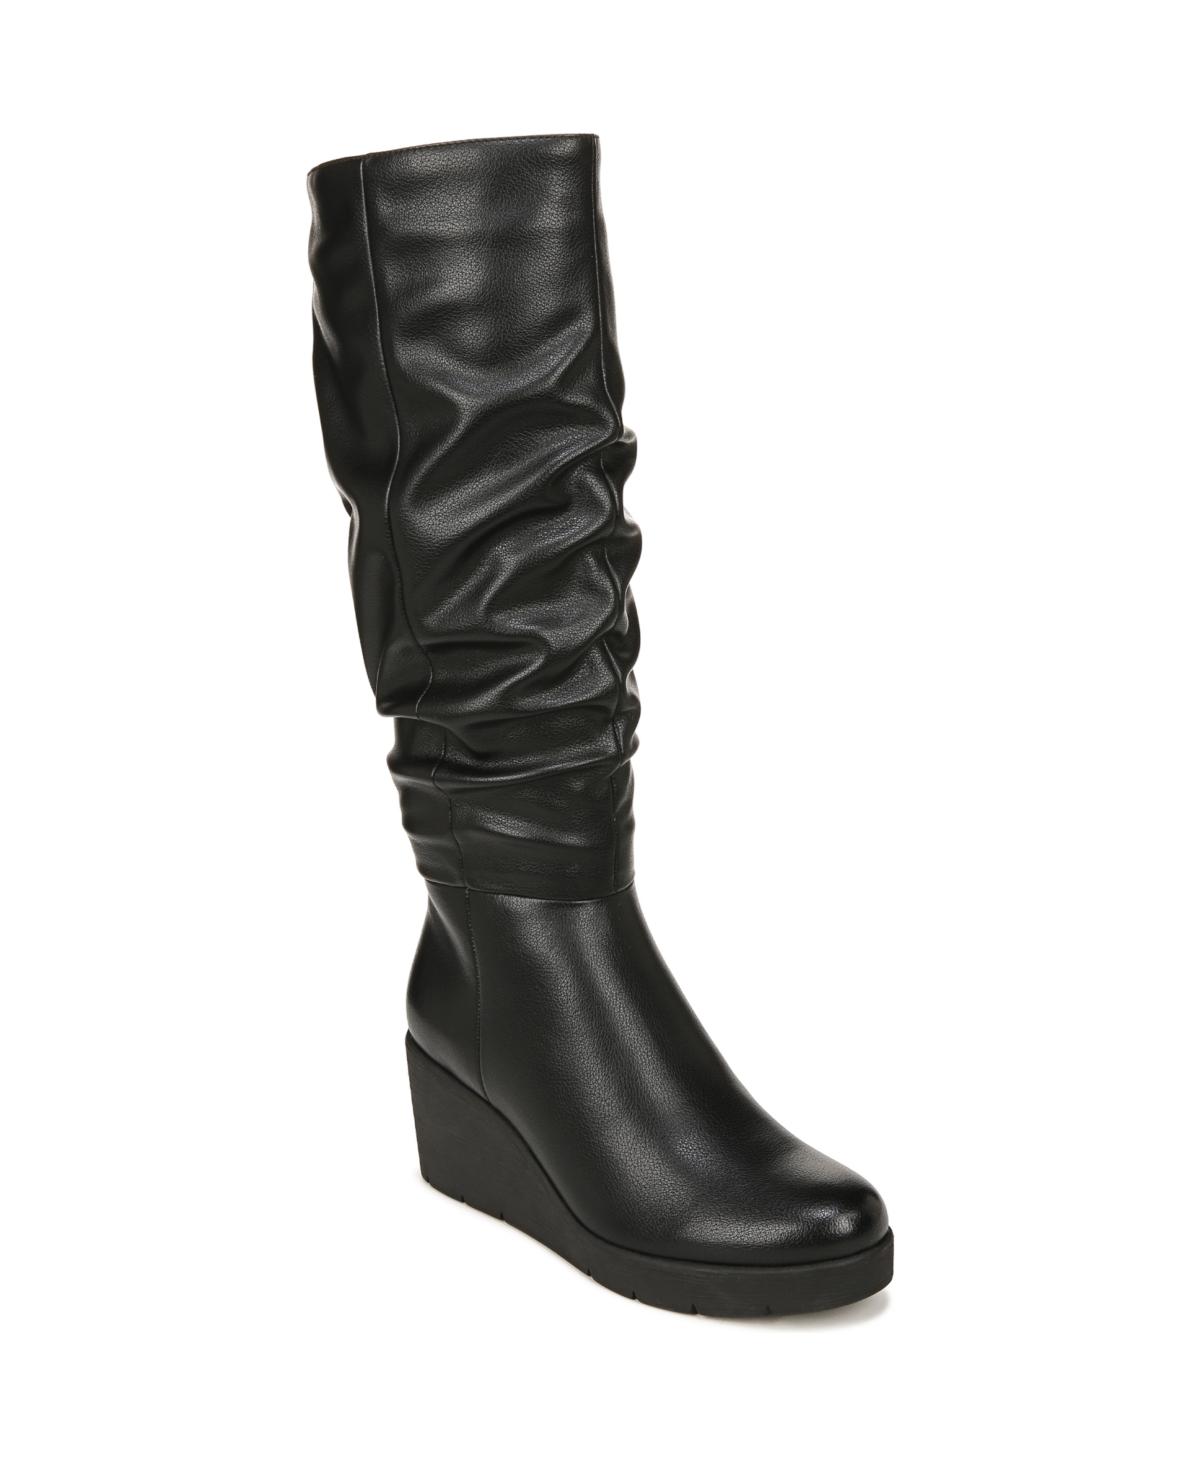 Aura Ruched Wedge Boots - Black Tumbled Faux Leather